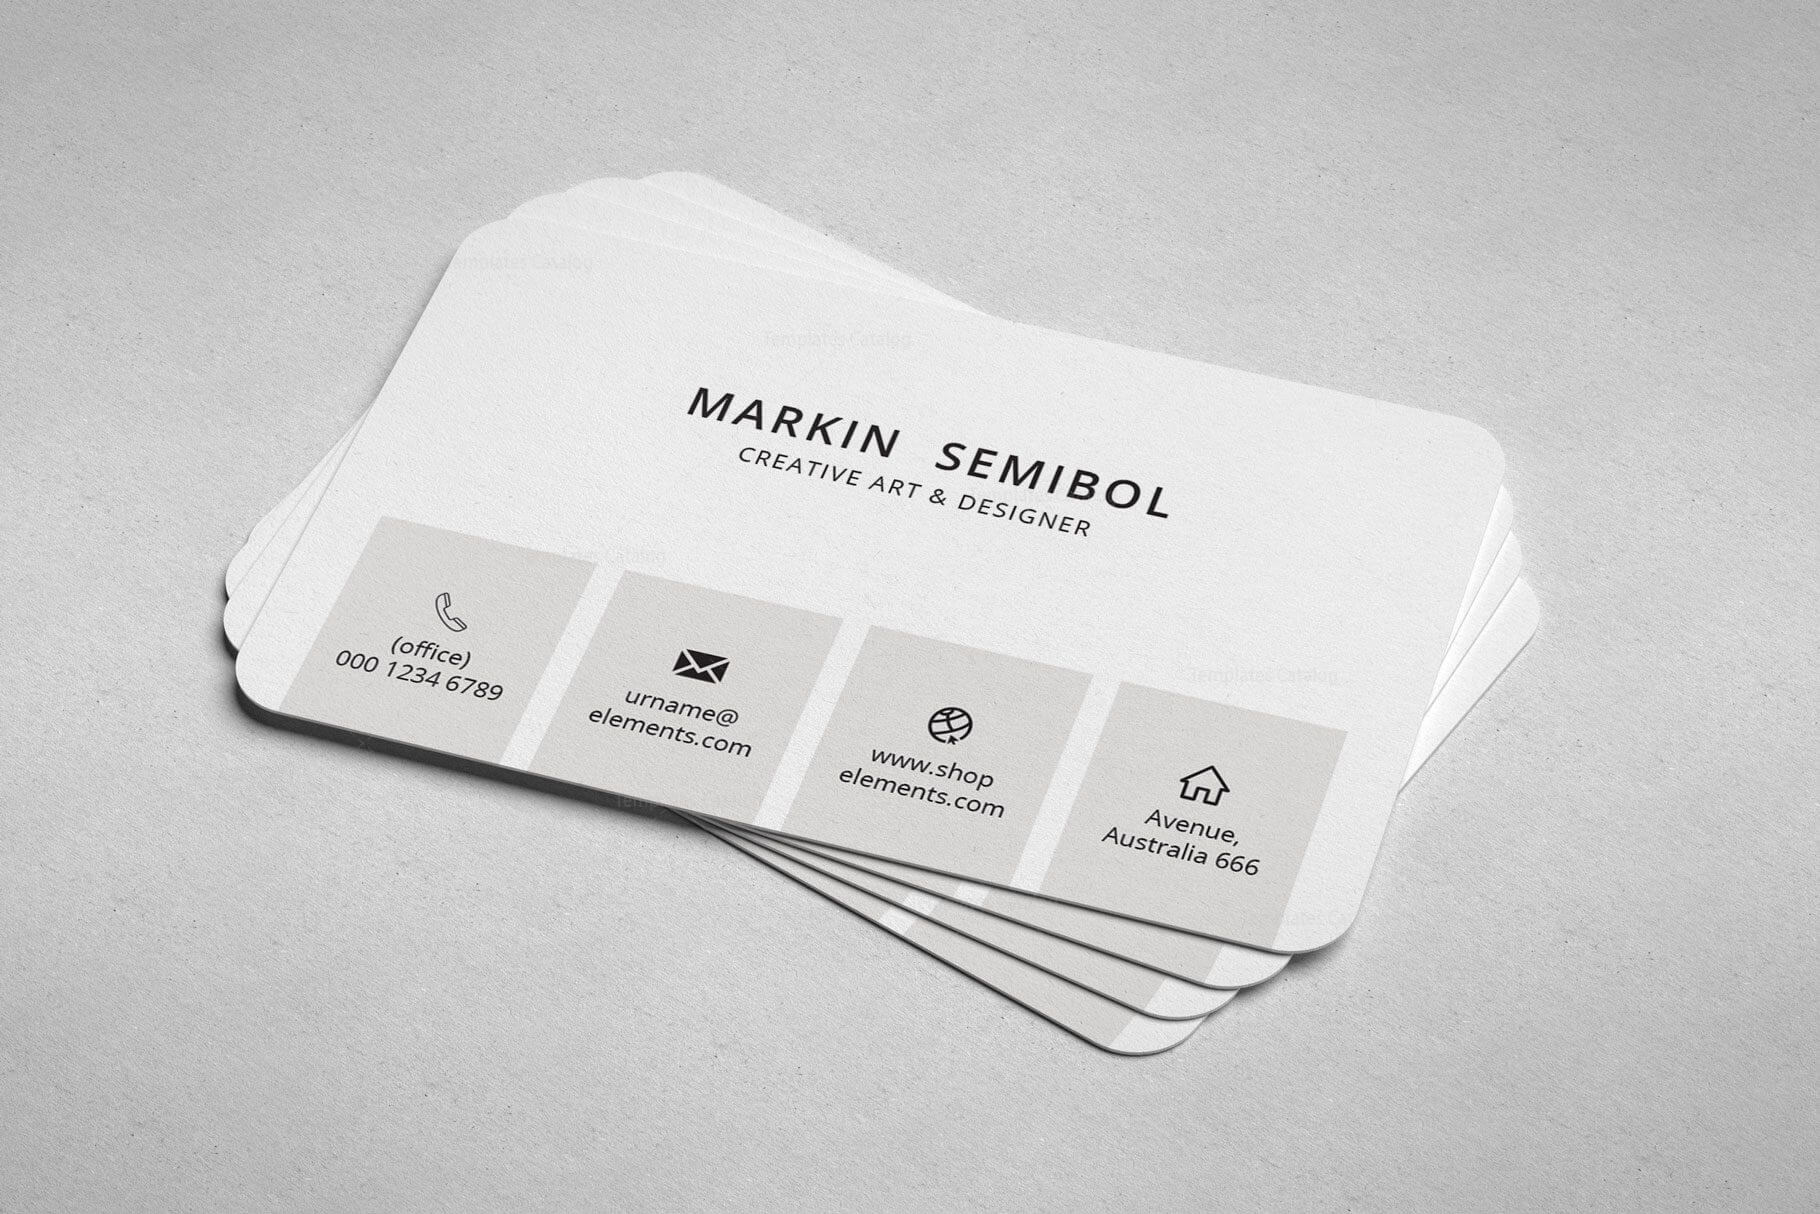 Lawyer Minimal Business Card Design In Lawyer Business Cards Templates